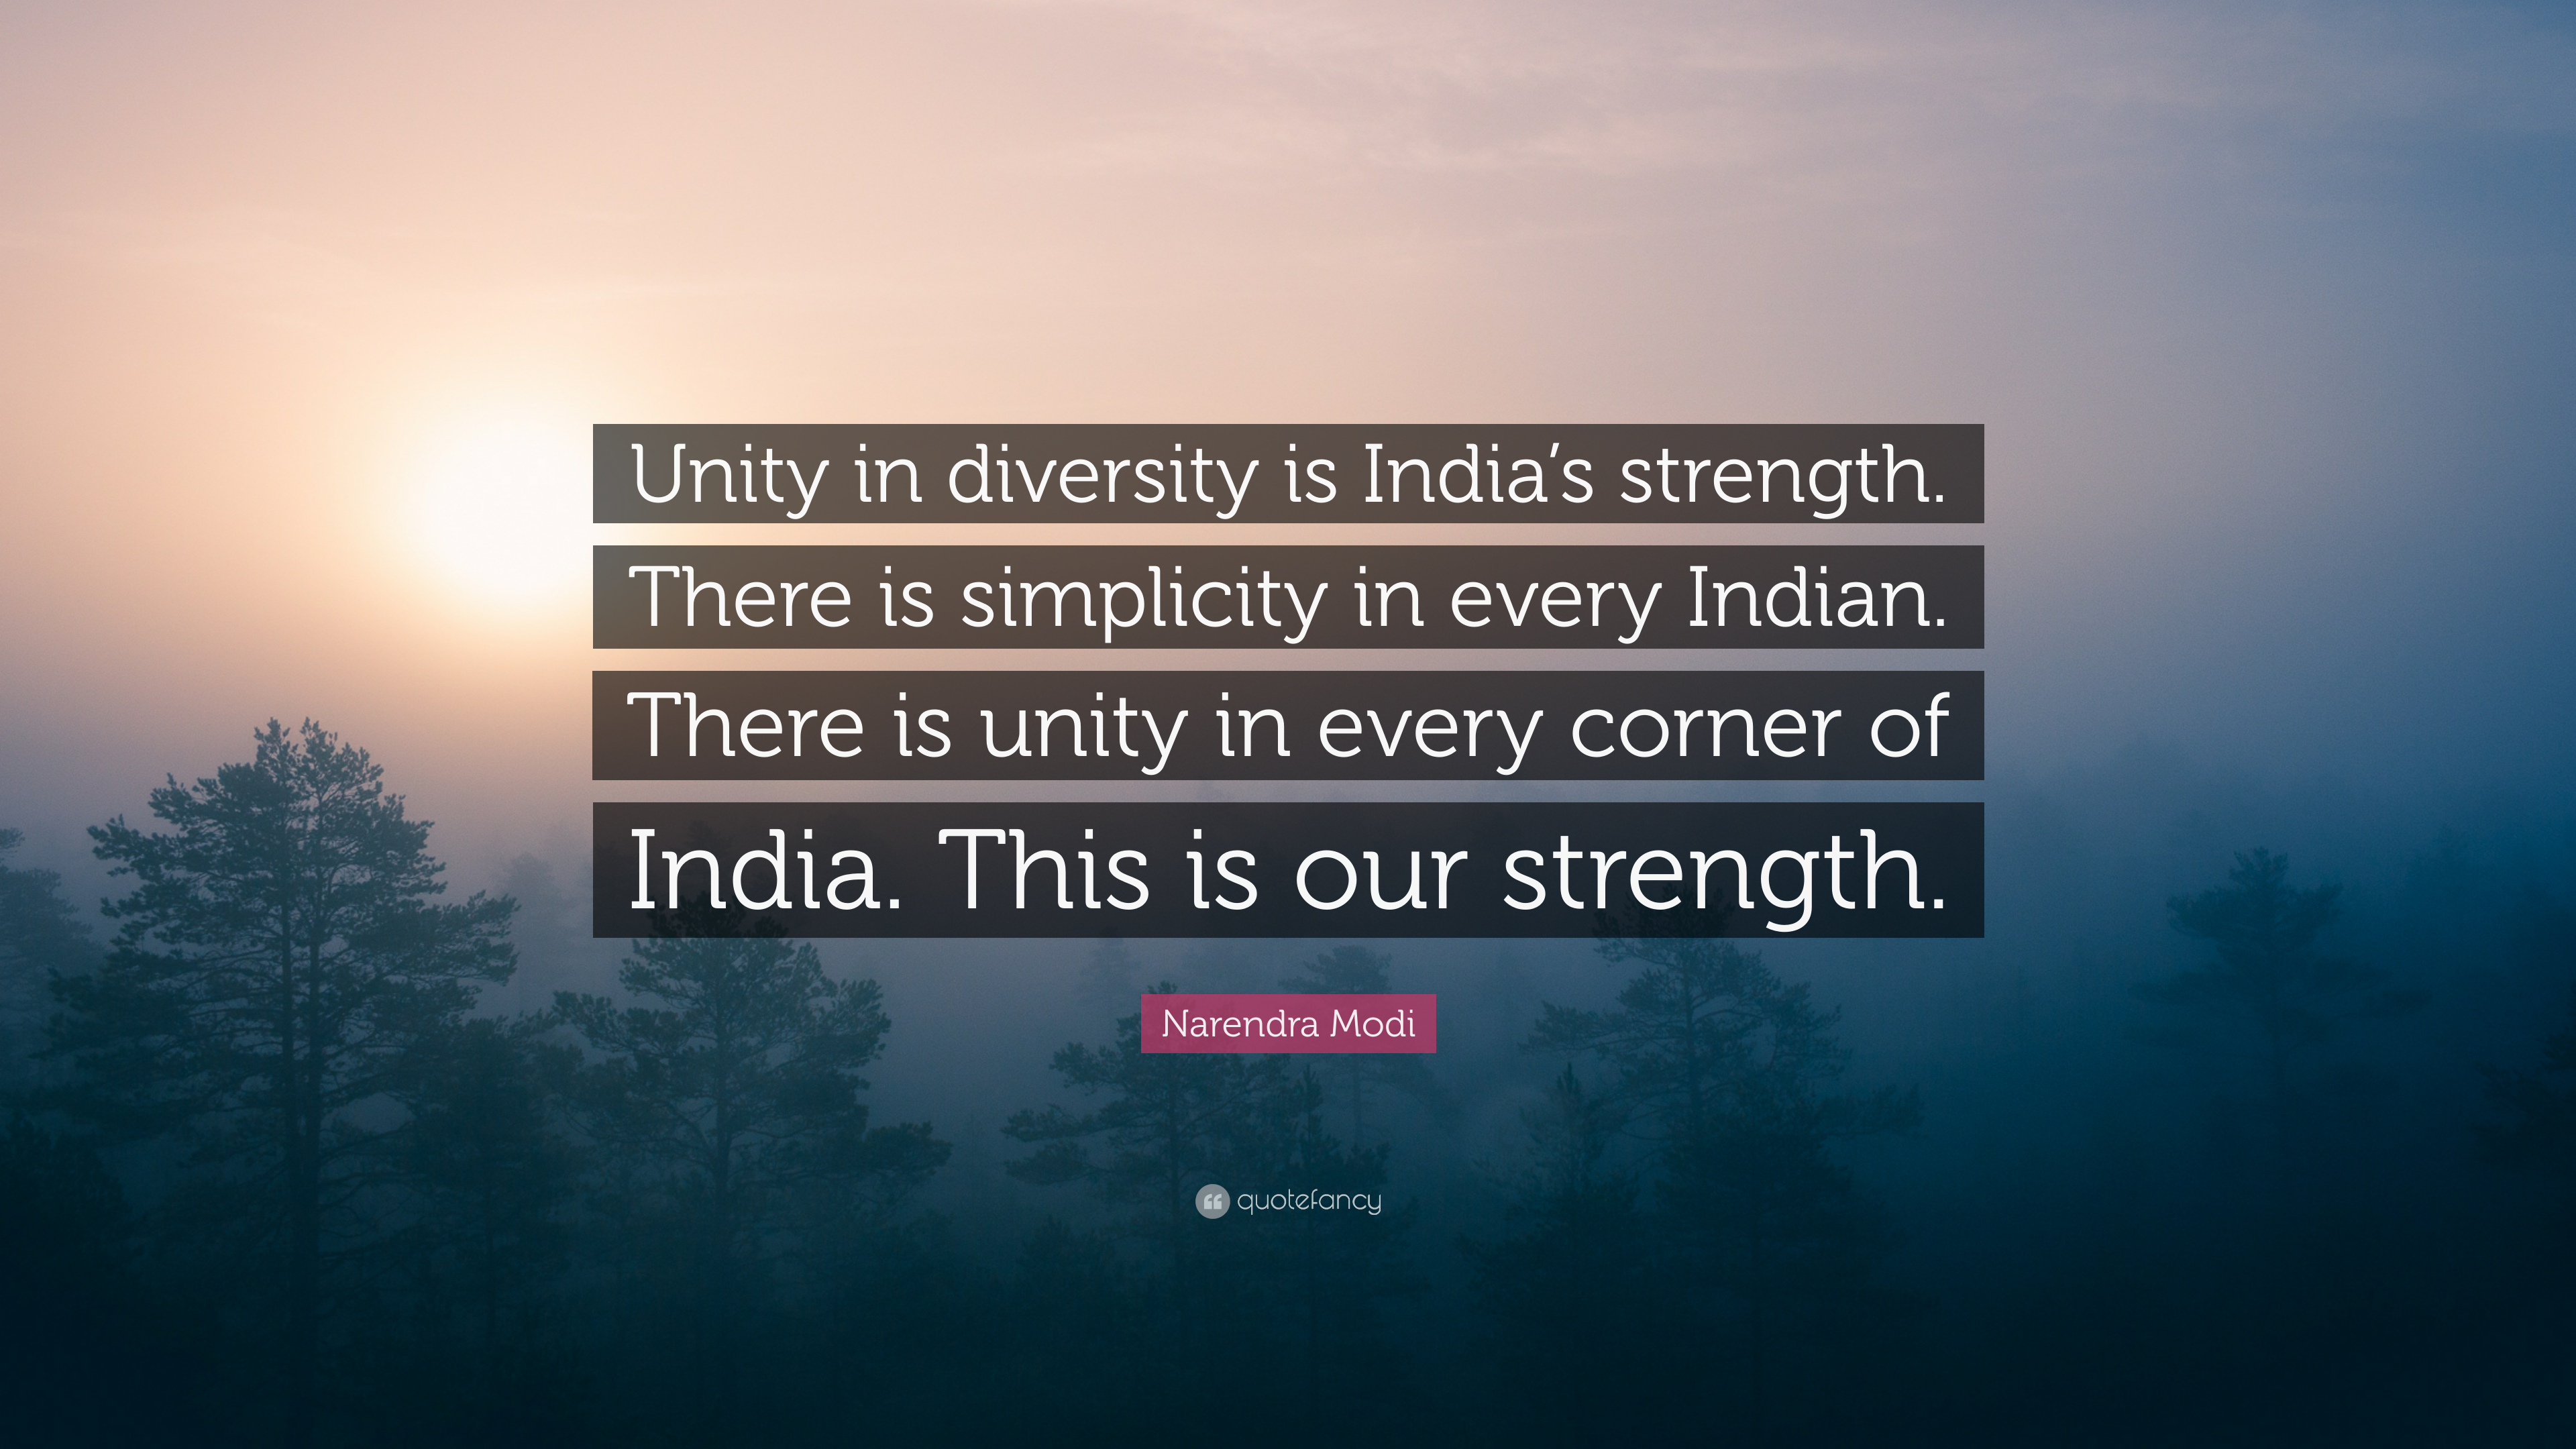 unity is diversity is india’s strength. there is simplicity in every indian. there is unity in every corner of india. this is out strength. narendra modi